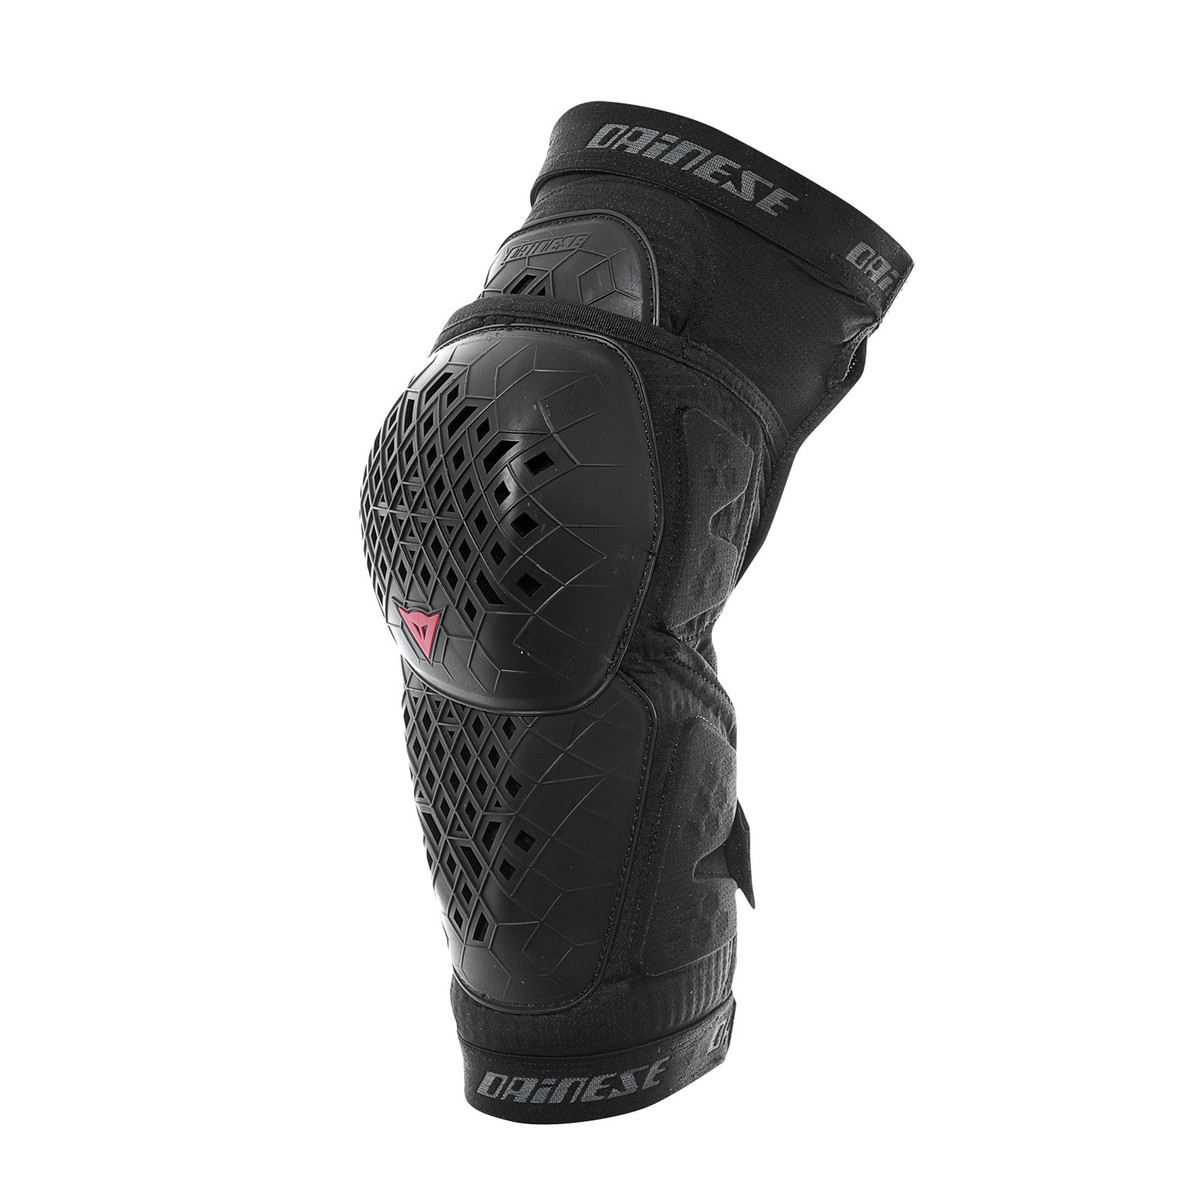 Armoform Knee Guard, knee protectors for MTB (DH, Gravity, All Mountain ...